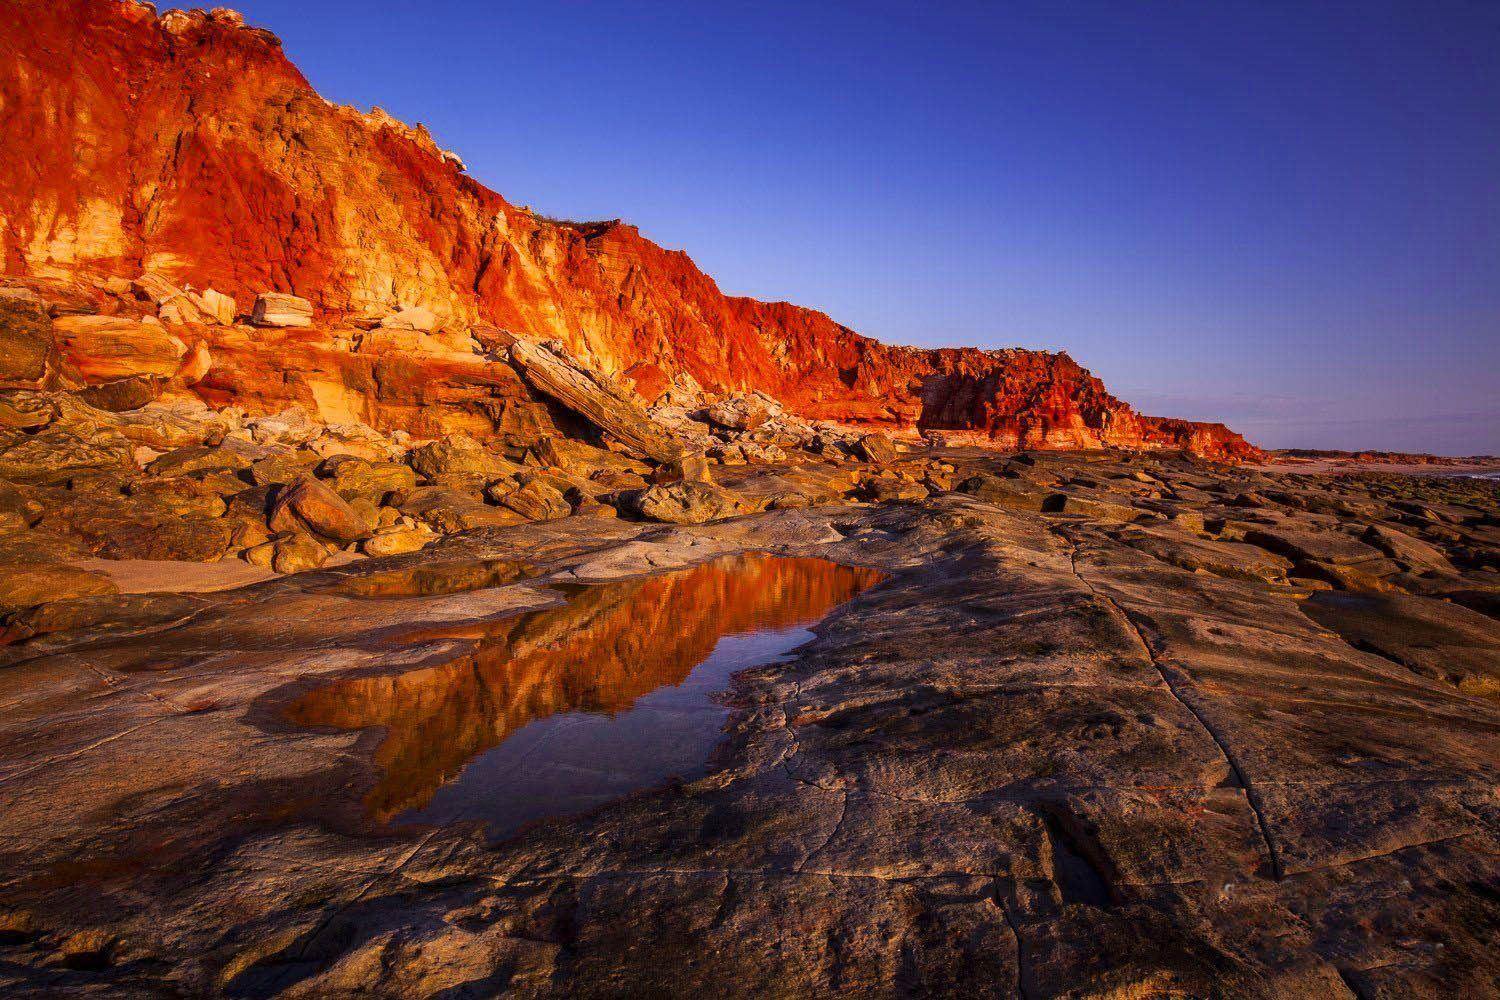 A long view of a long mountain wall with the shades of shiny red and orange, depicting a burning fire phenonema, a little water on the land with a clear reflection of the burning mountain wall, Cape Leveque - The Kimberley